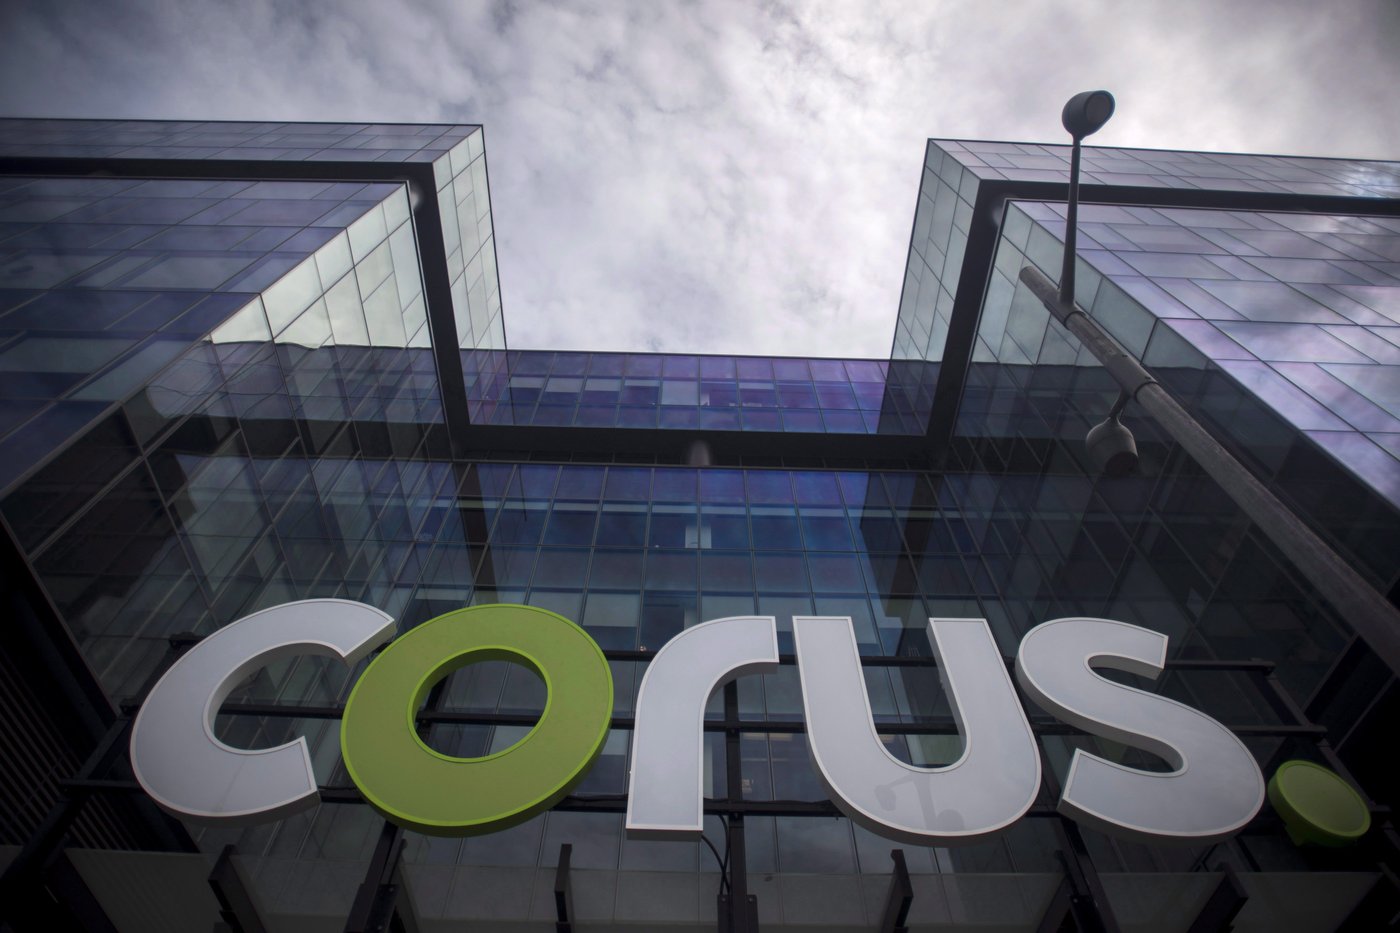 Corus replaces CEO after losing key content rights to Rogers